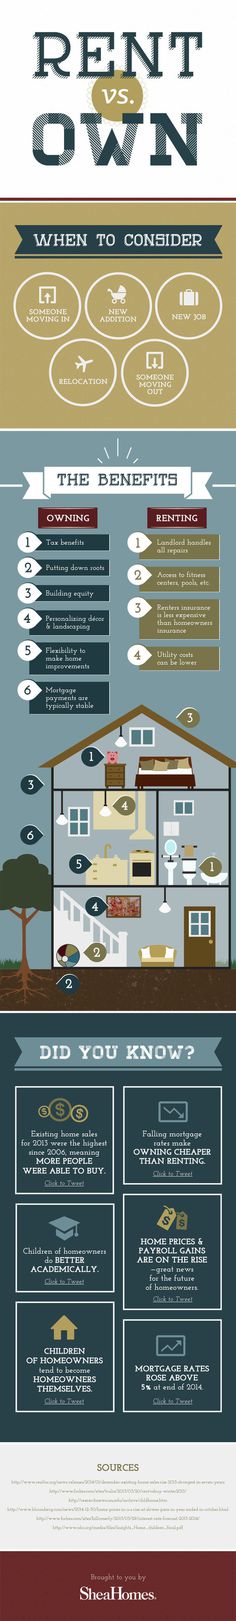 Is it better to rent or buy? Learn which considerations to make from this infographic. #buy #buying #rent #home